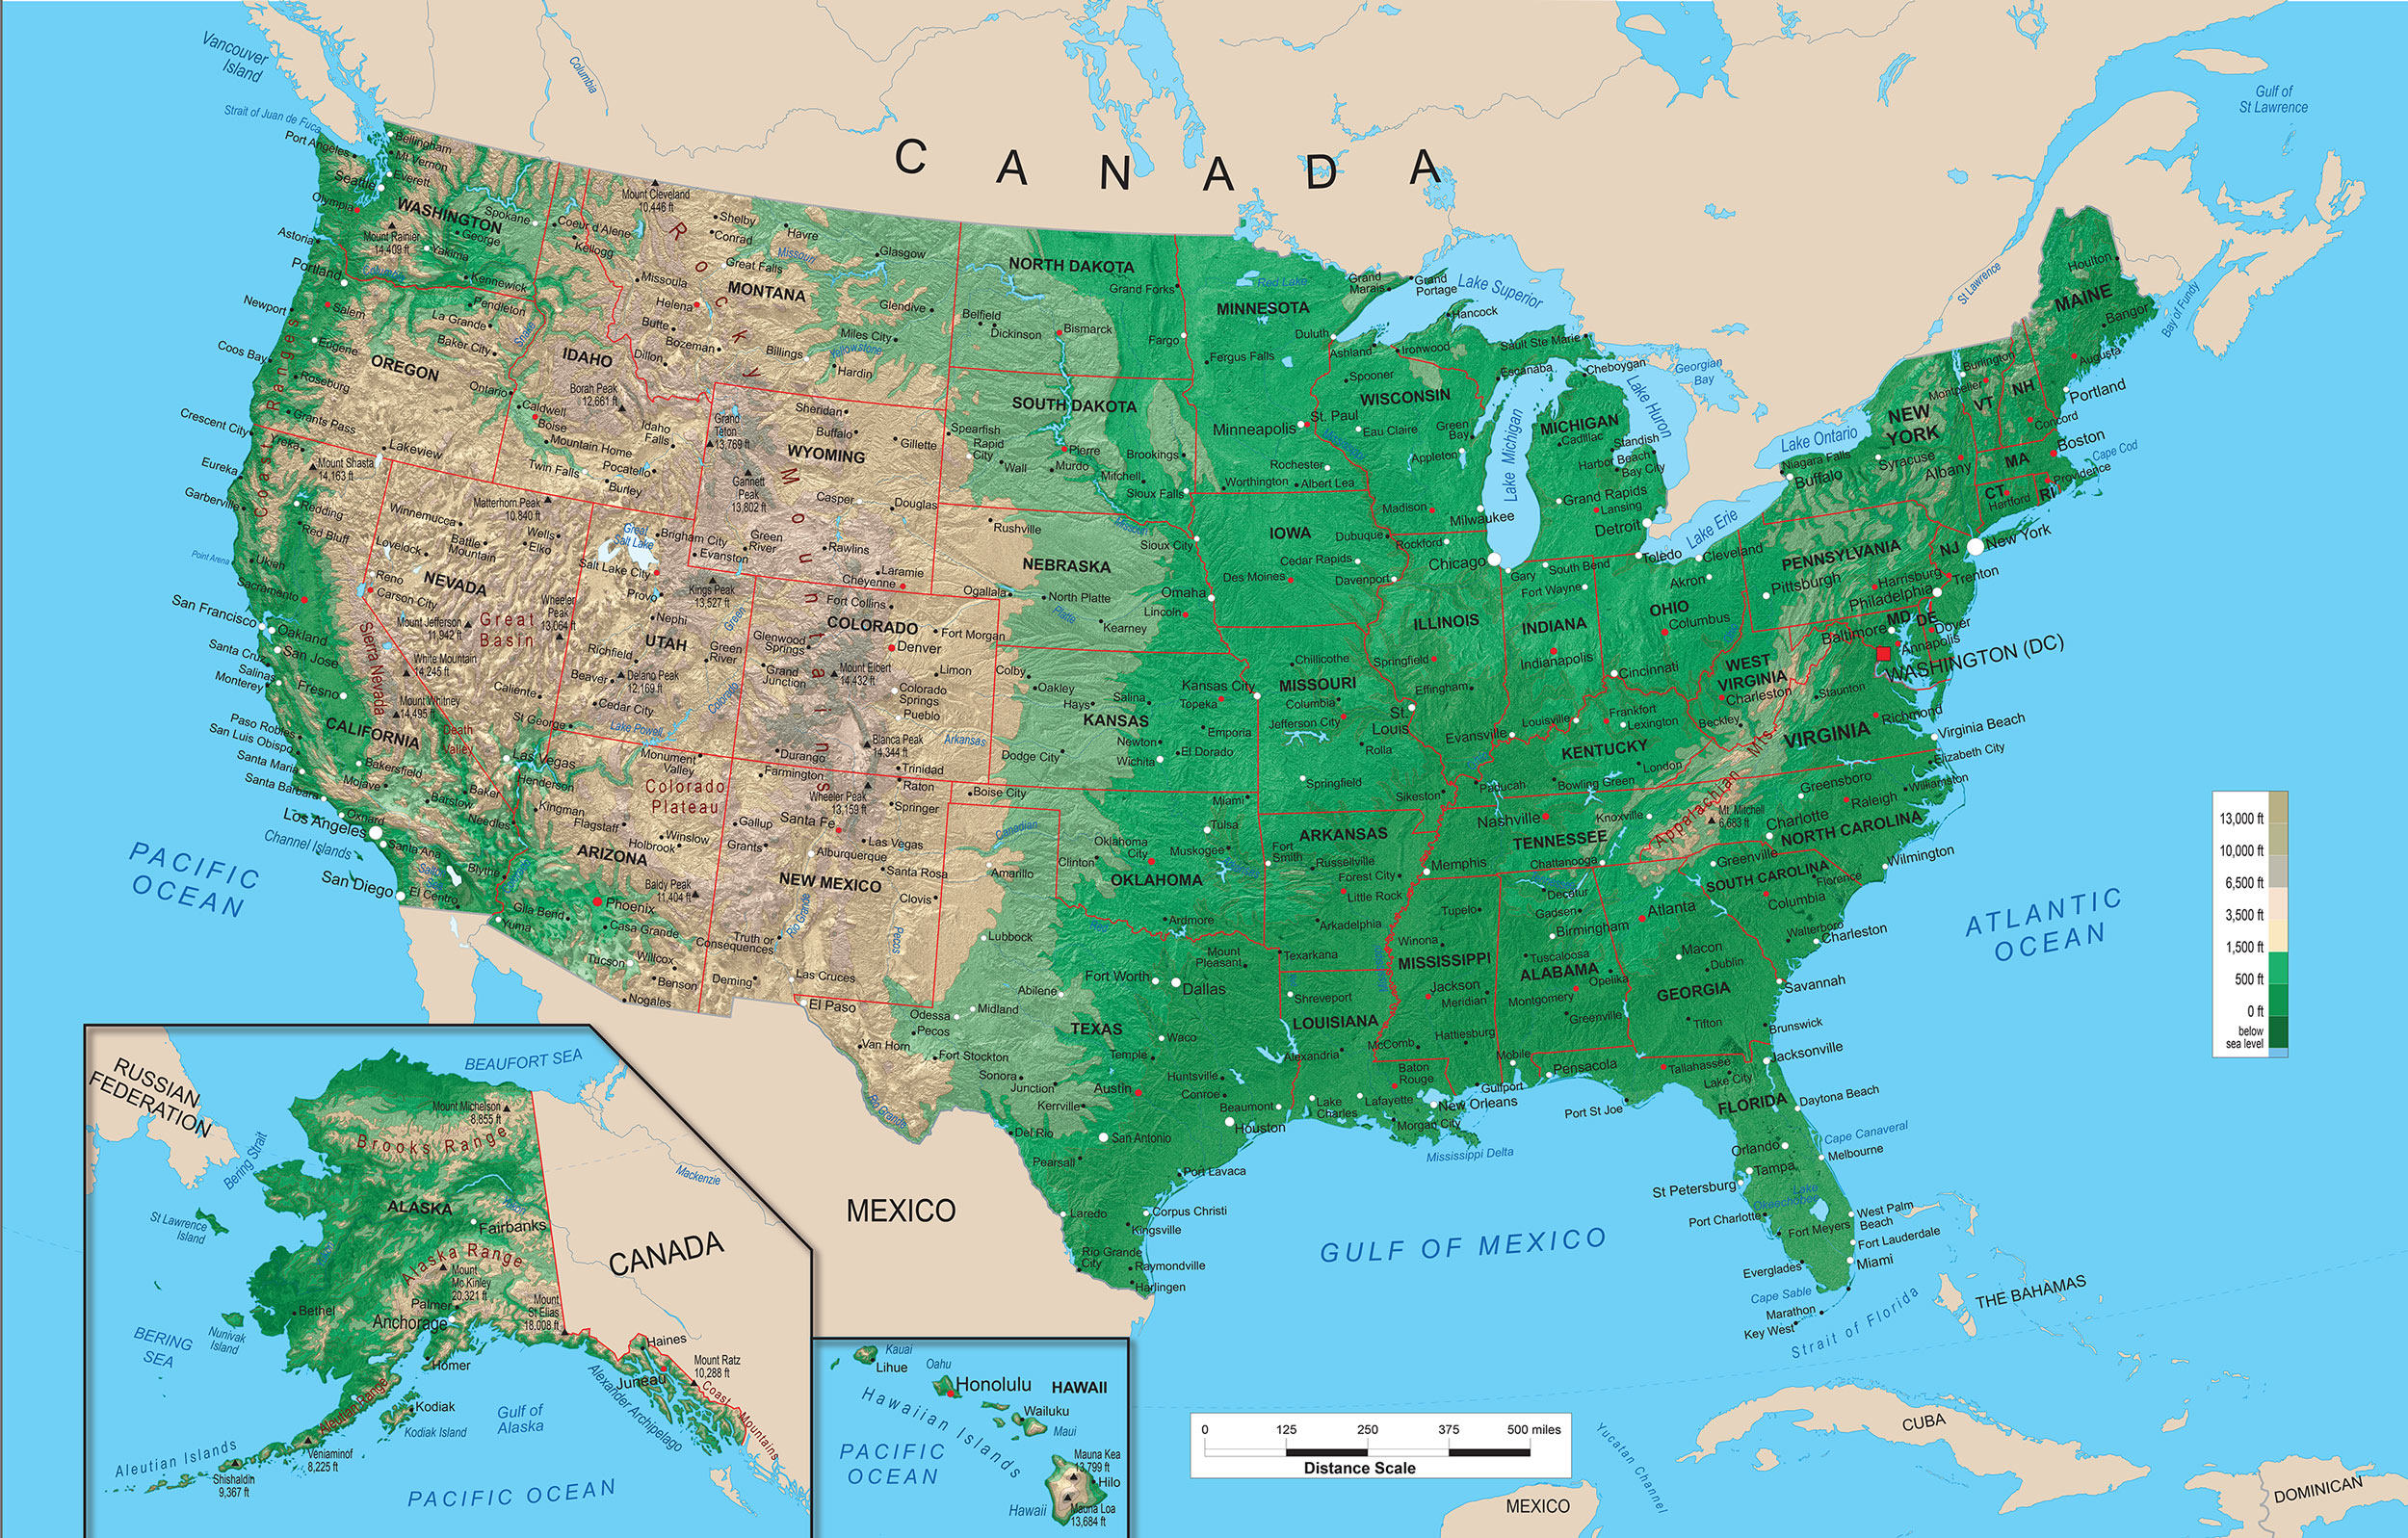 topographic elevation map of the united states 11 Topographic Map Of The United States Images Us Topographic topographic elevation map of the united states